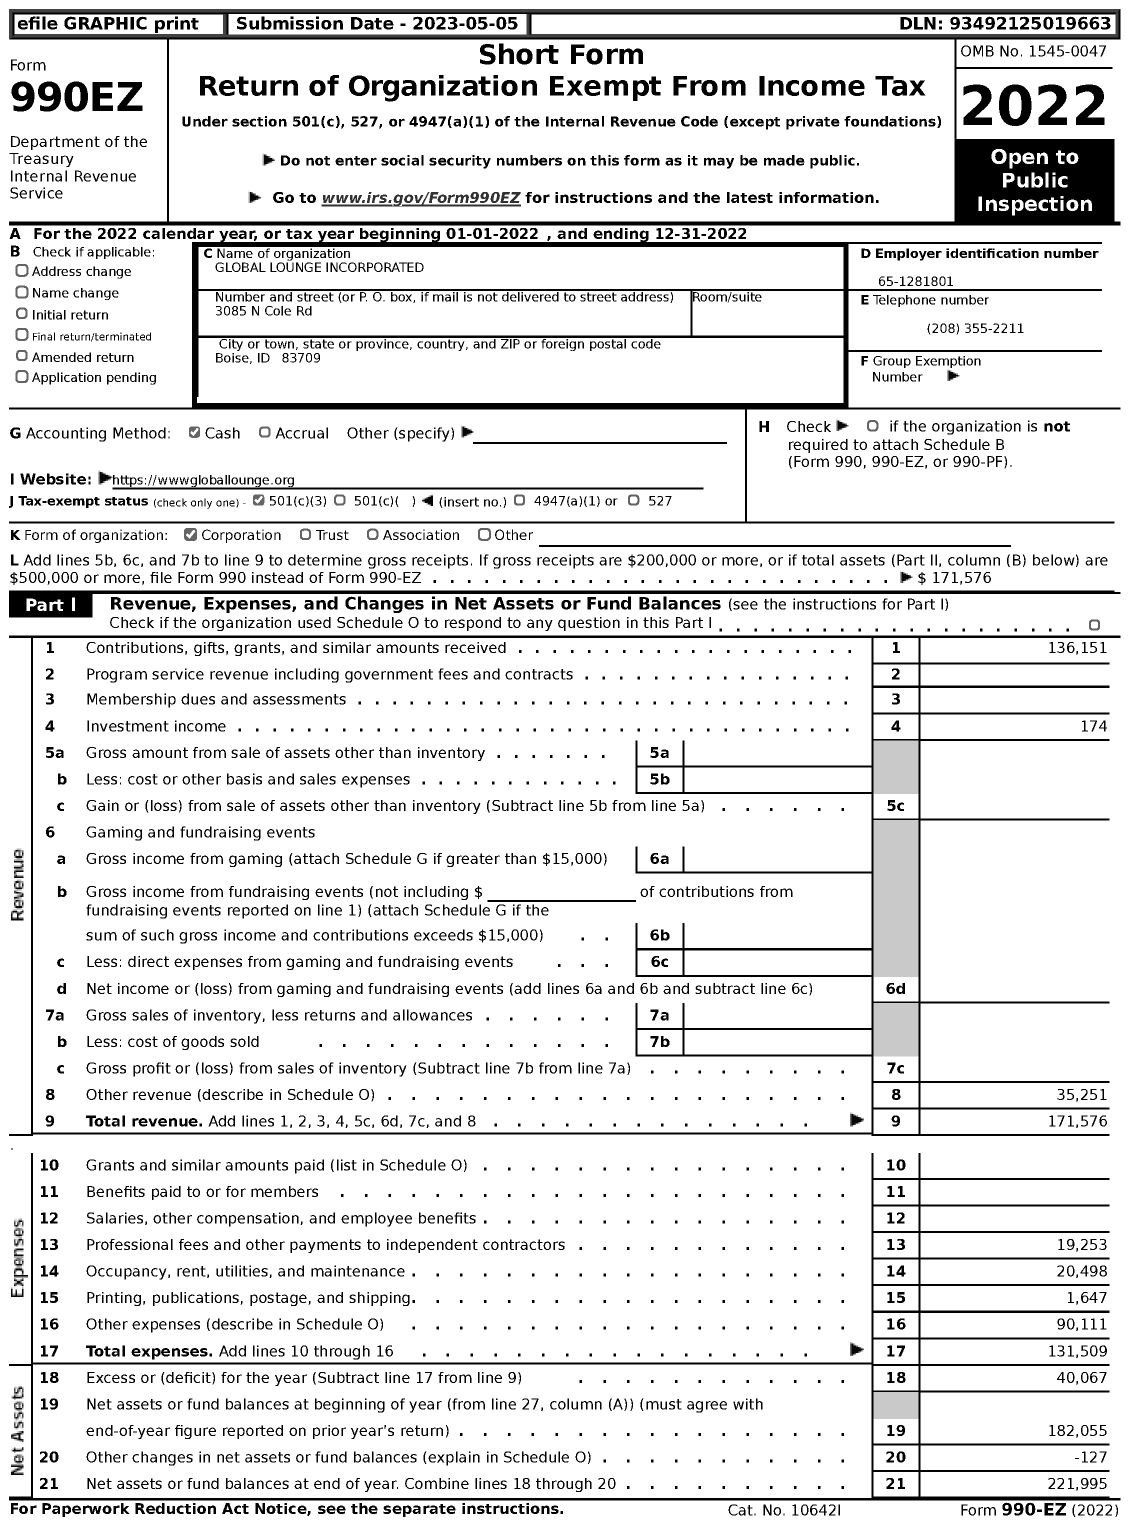 Image of first page of 2022 Form 990EZ for Global Lounge Incorporated